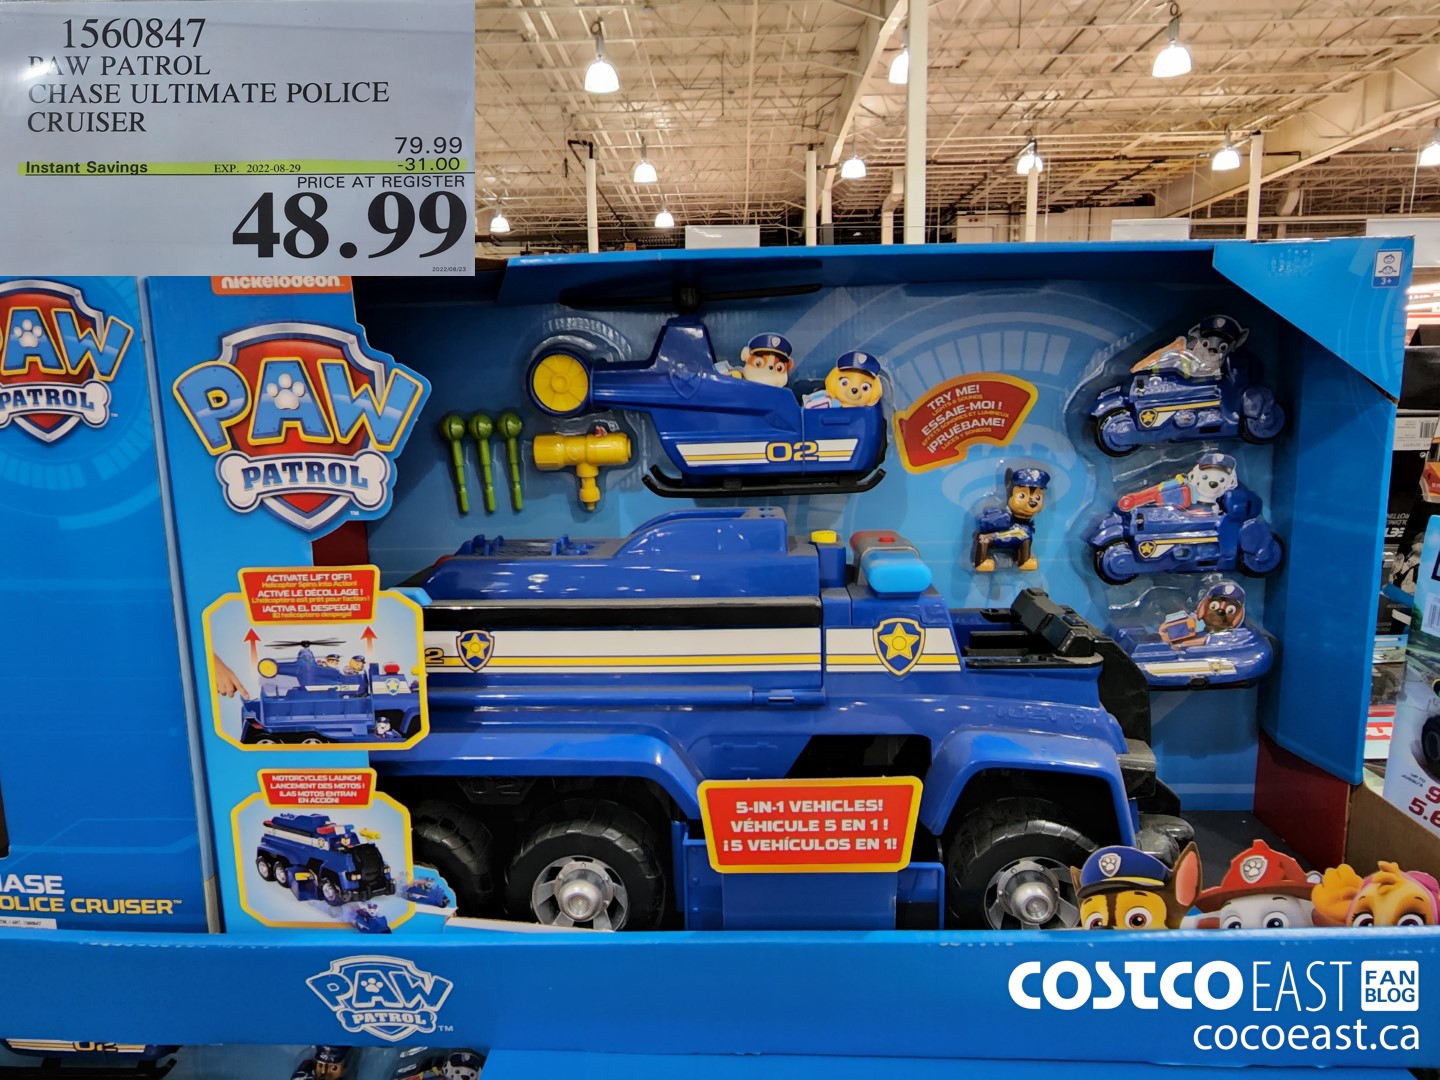 1560847 PAW PATROL CHASE ULTIMATE POLICE CRUISER 31 00 INSTANT SAVINGS  EXPIRES ON 2022 08 29 48 99 - Costco East Fan Blog